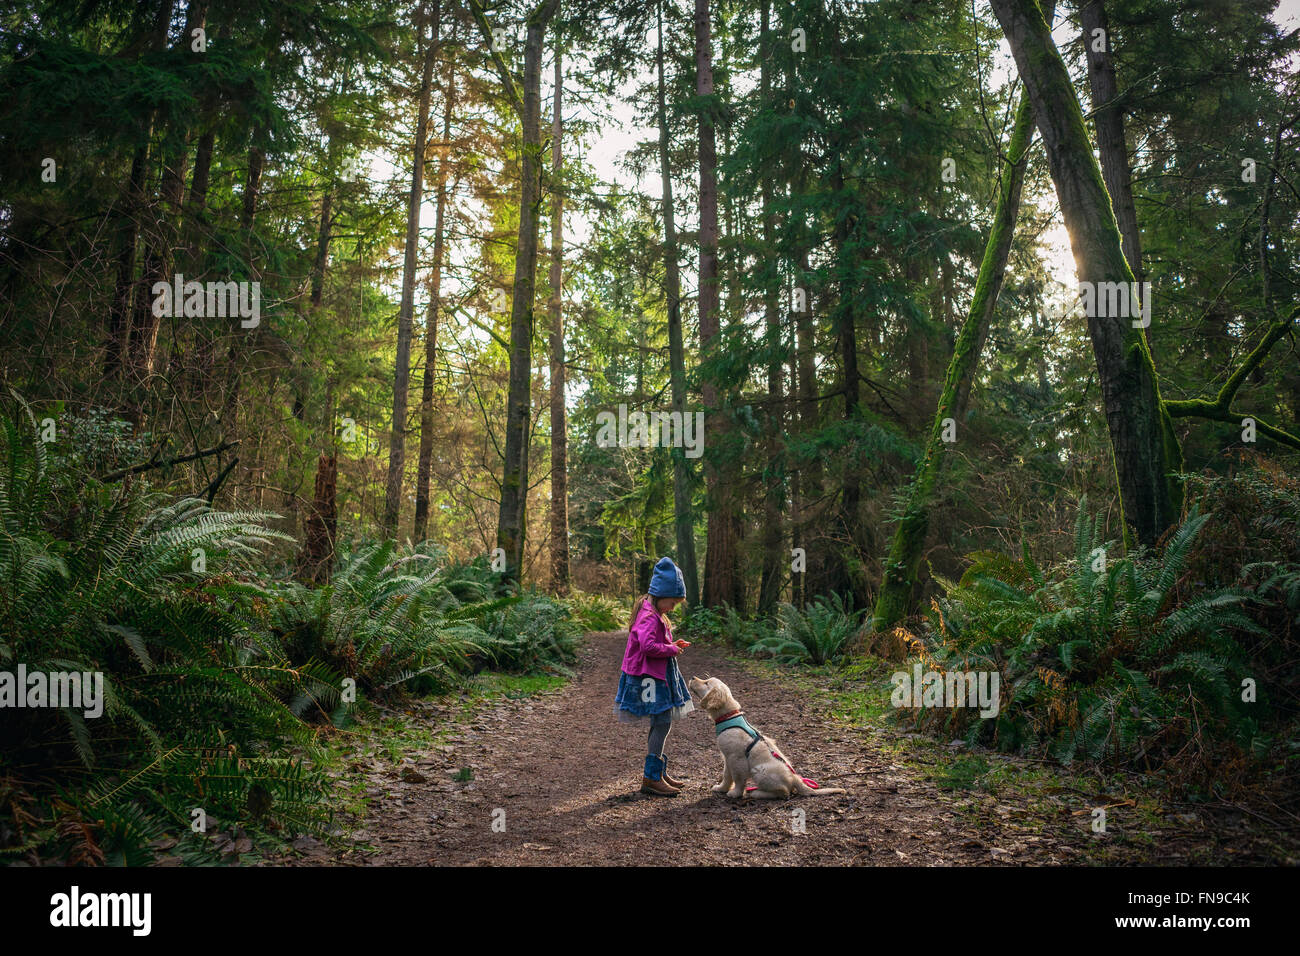 Girl standing in forest with golden retriever puppy dog Stock Photo